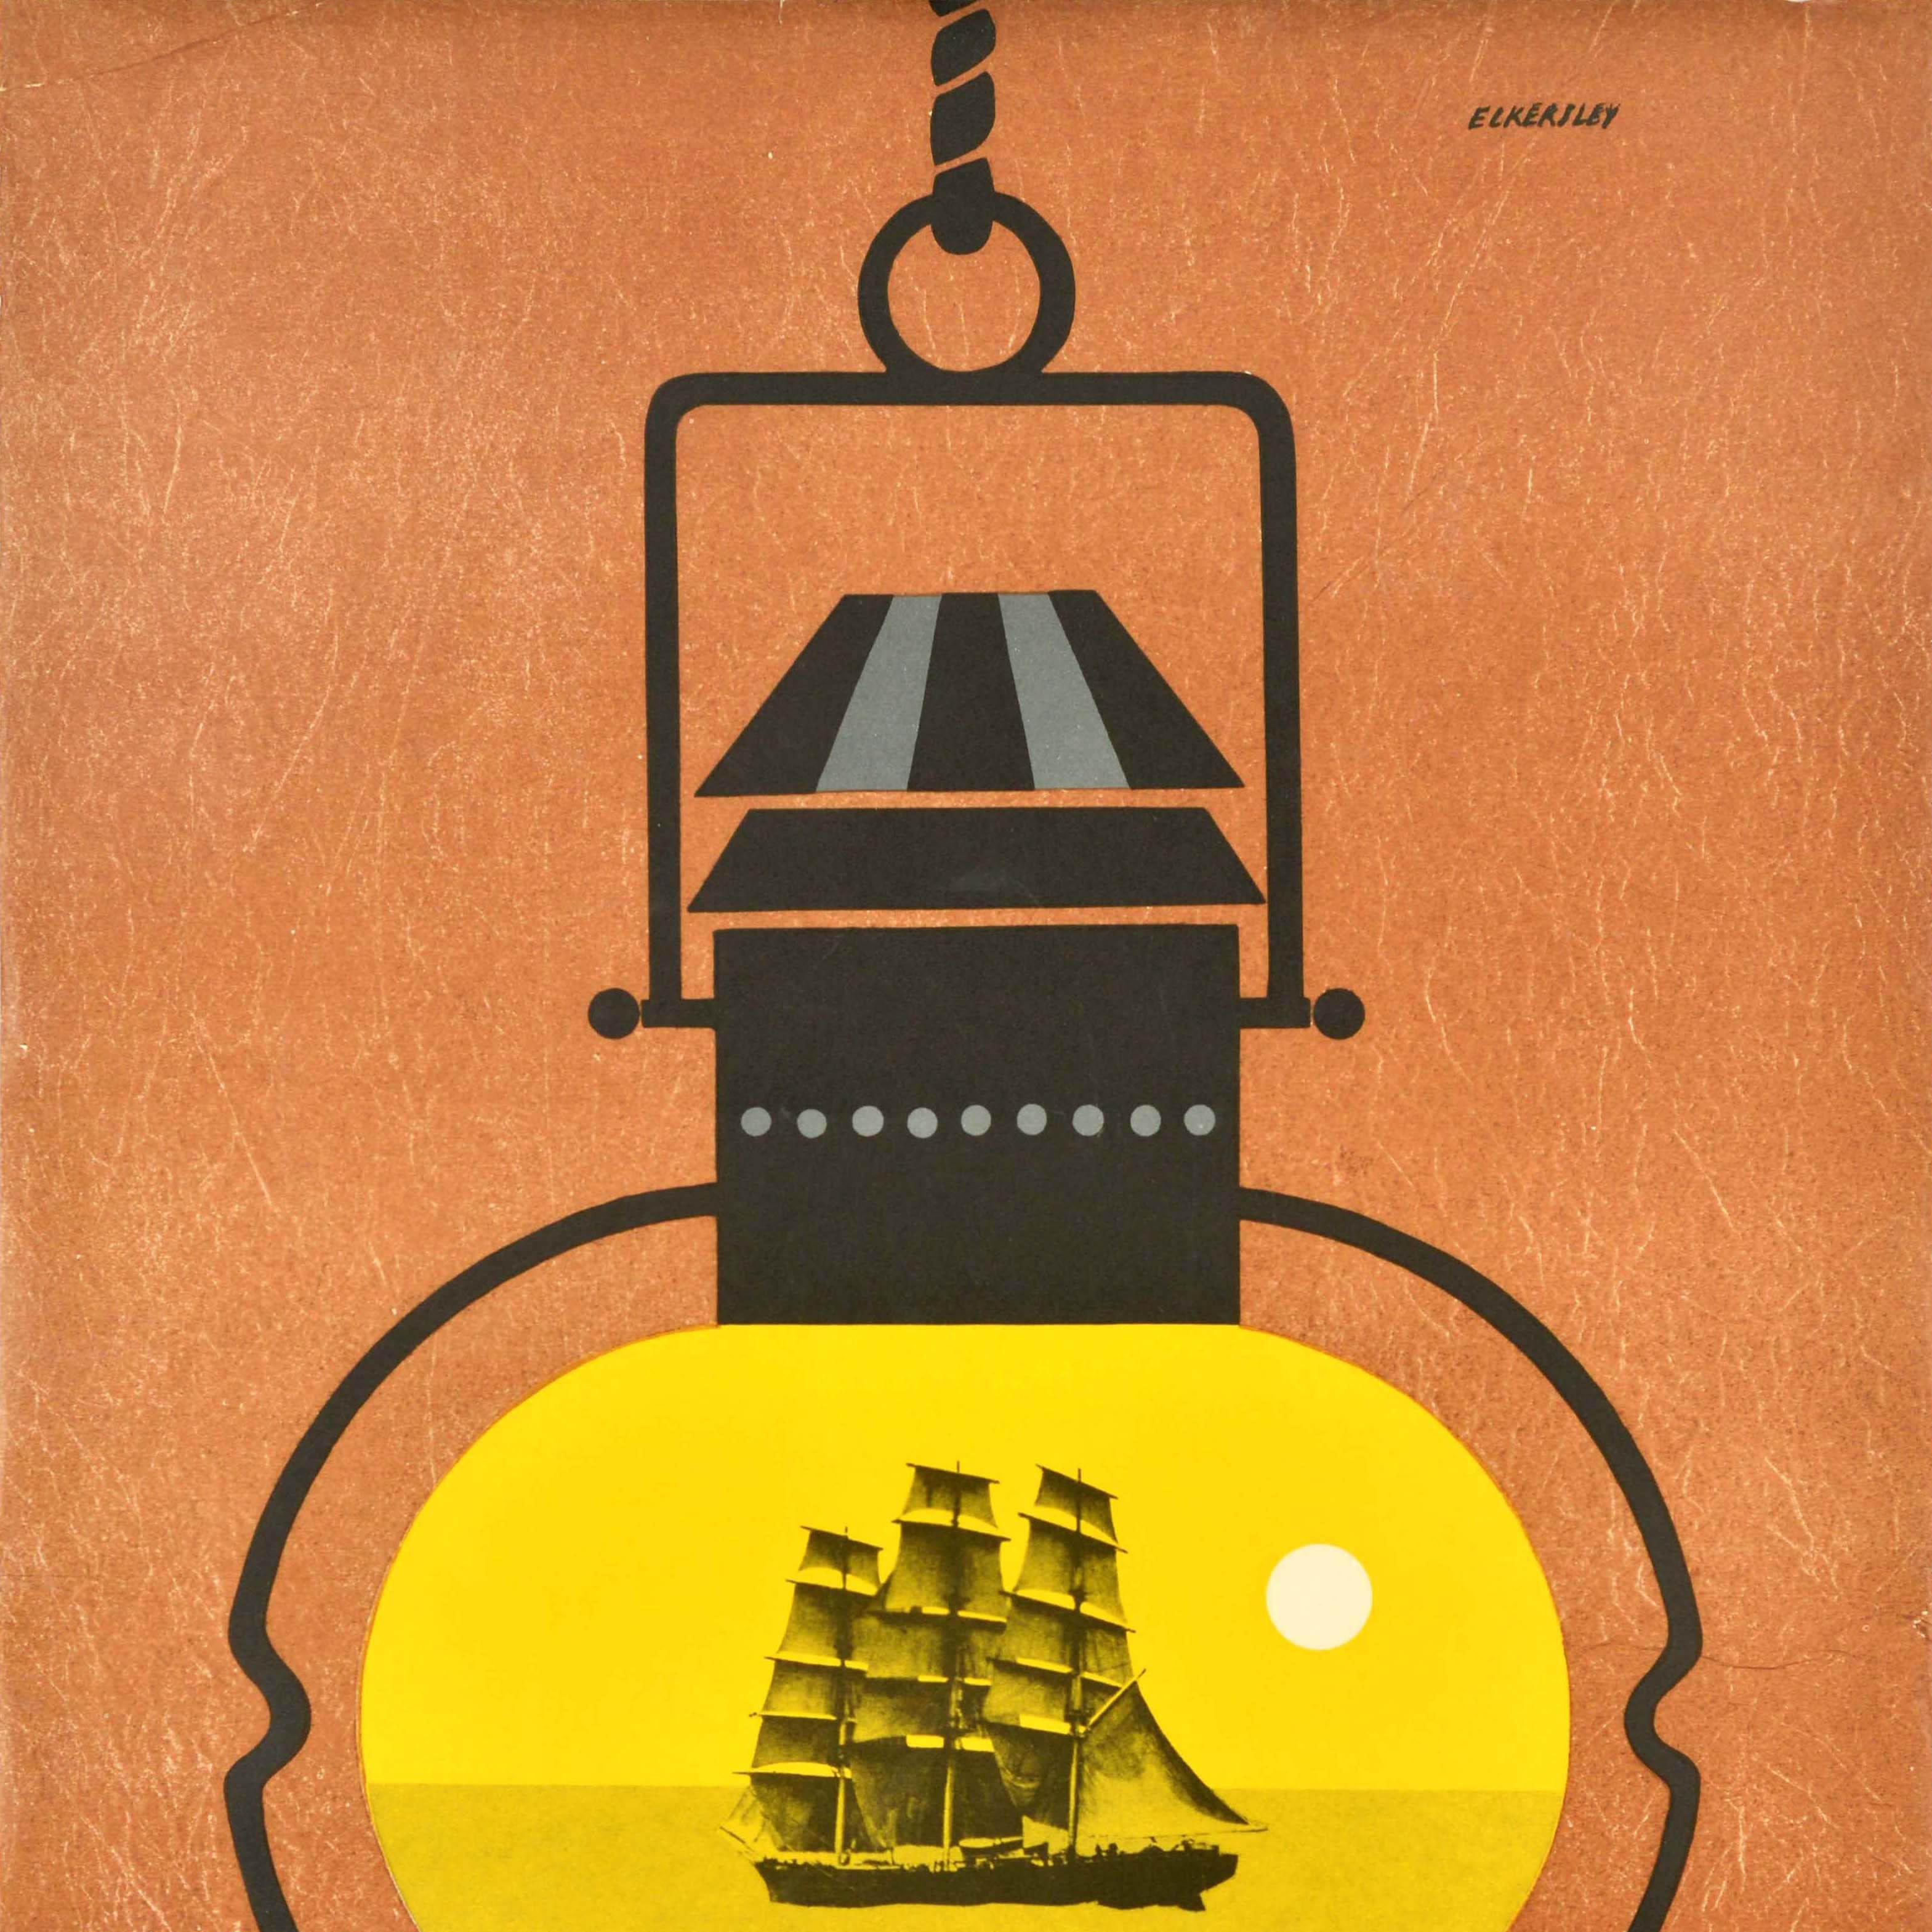 Original Vintage Travel Poster Cutty Sark Clipper Ship London UK Tom Eckersley For Sale 2